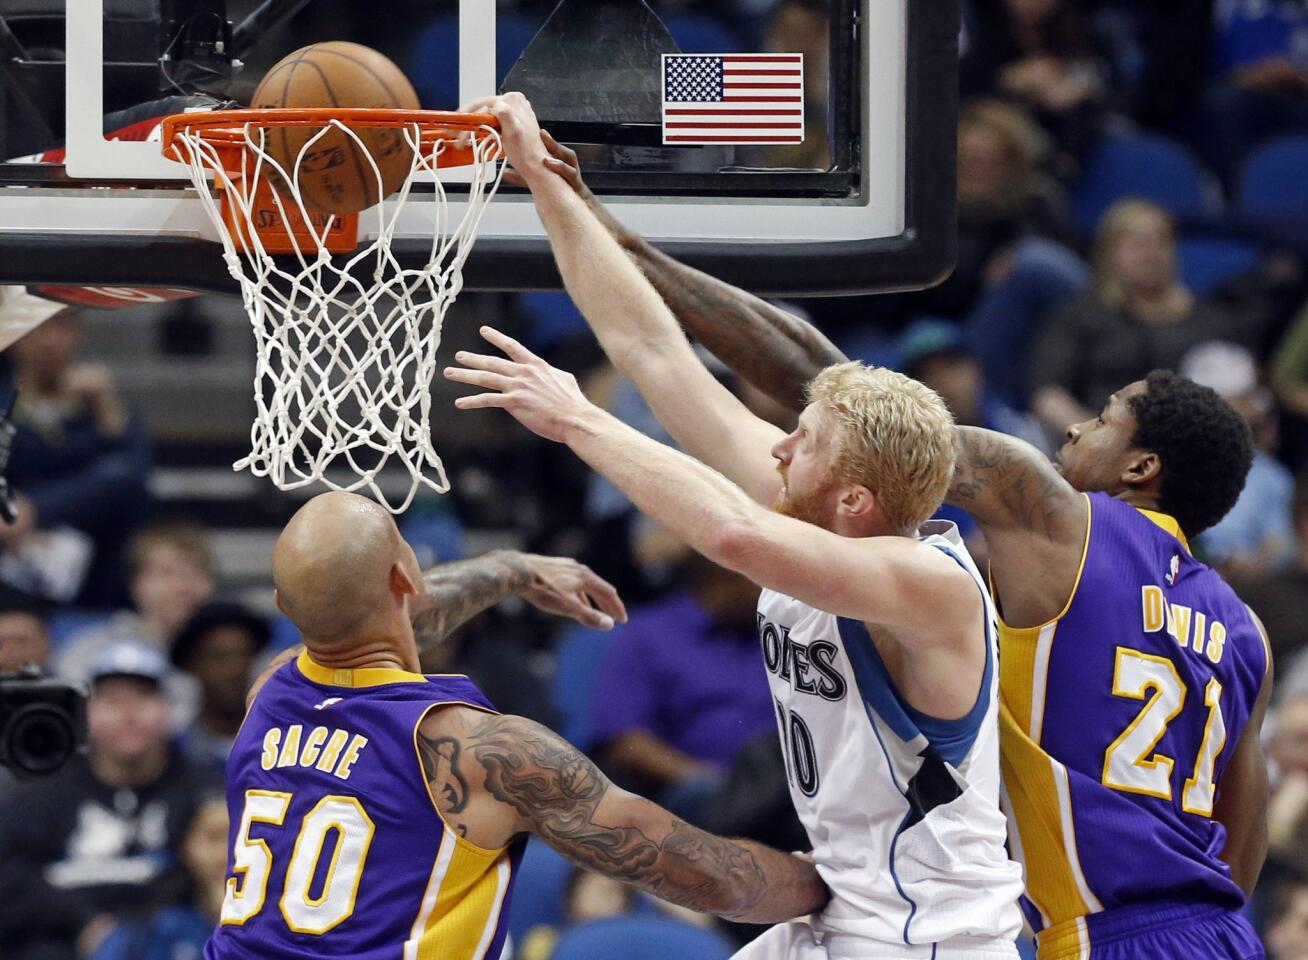 Timberwolves forward Chase Budinger dunks between Lakers defenders Ed Davis (21) and Robert Sacre (50) during the second half of the Lakers' 101-99 overtime victory.